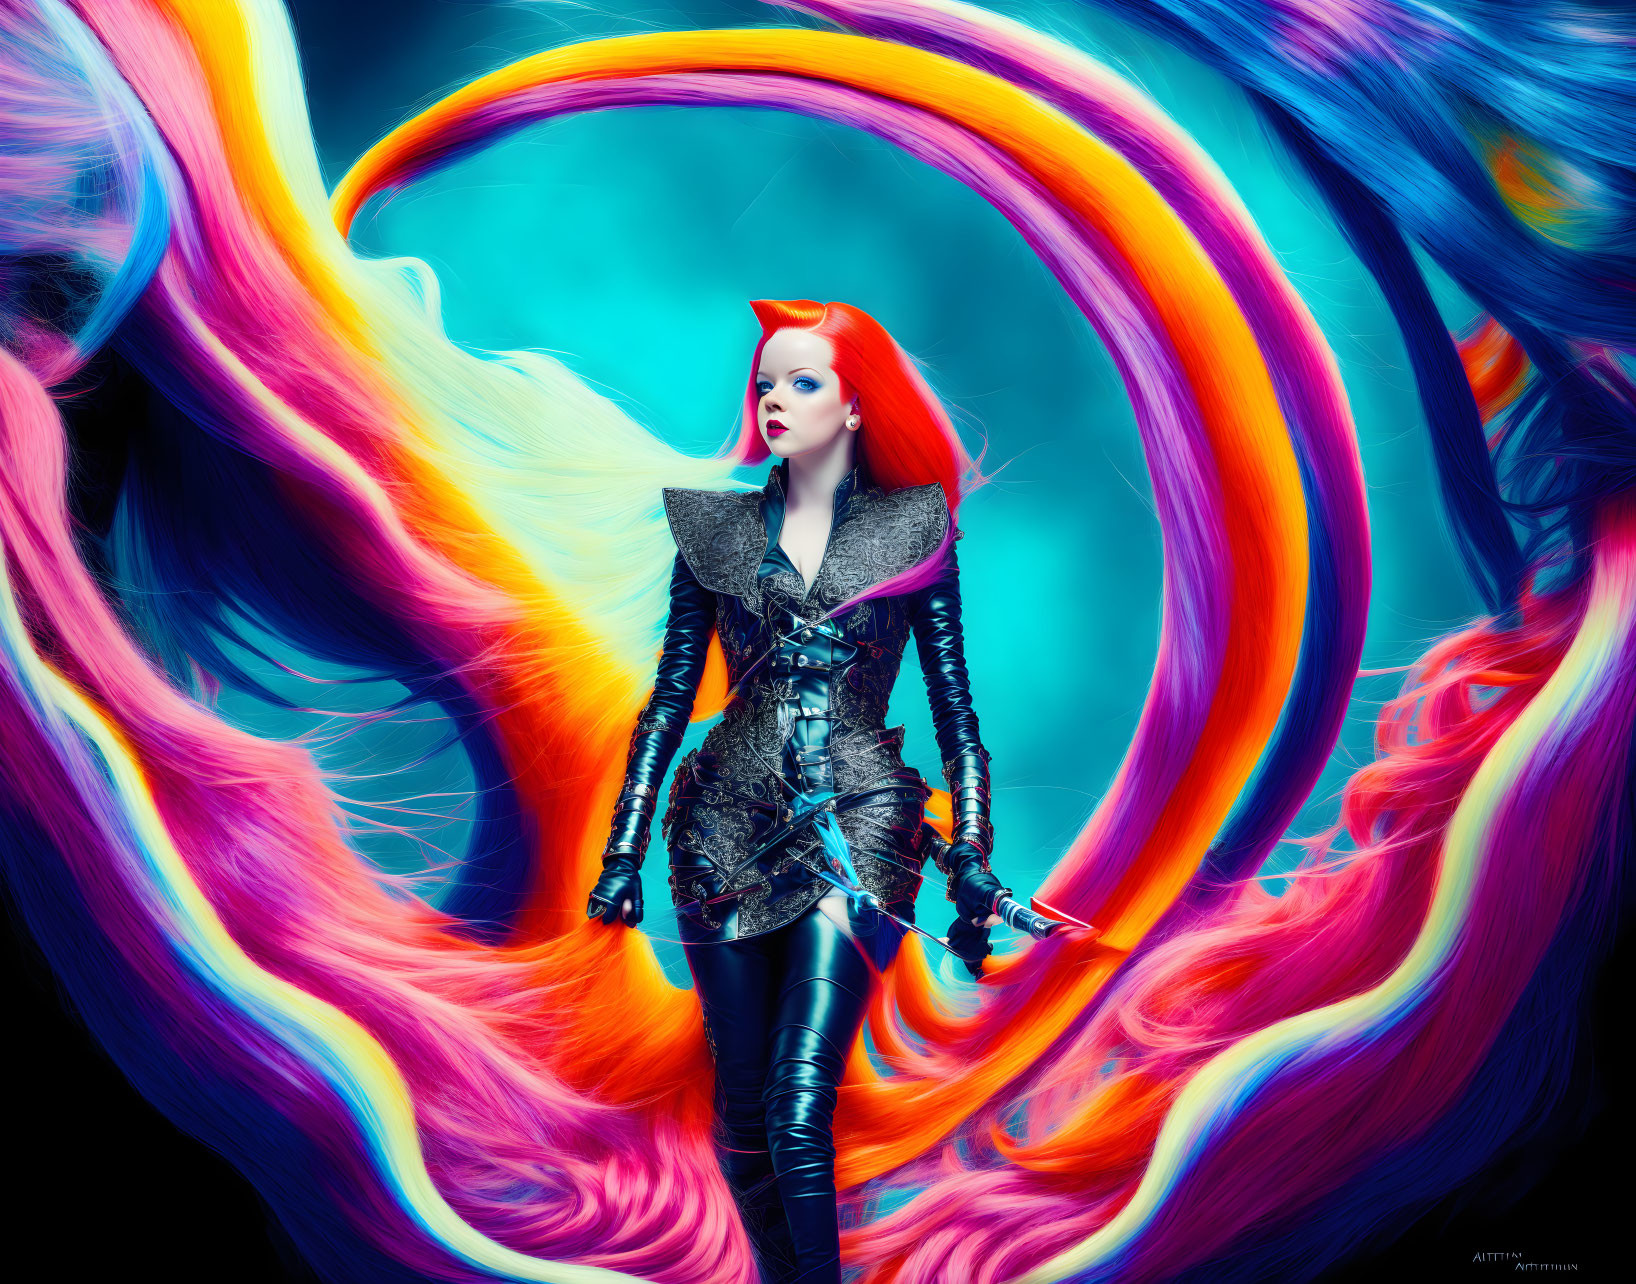 Red-haired woman in gothic attire against vibrant neon backdrop